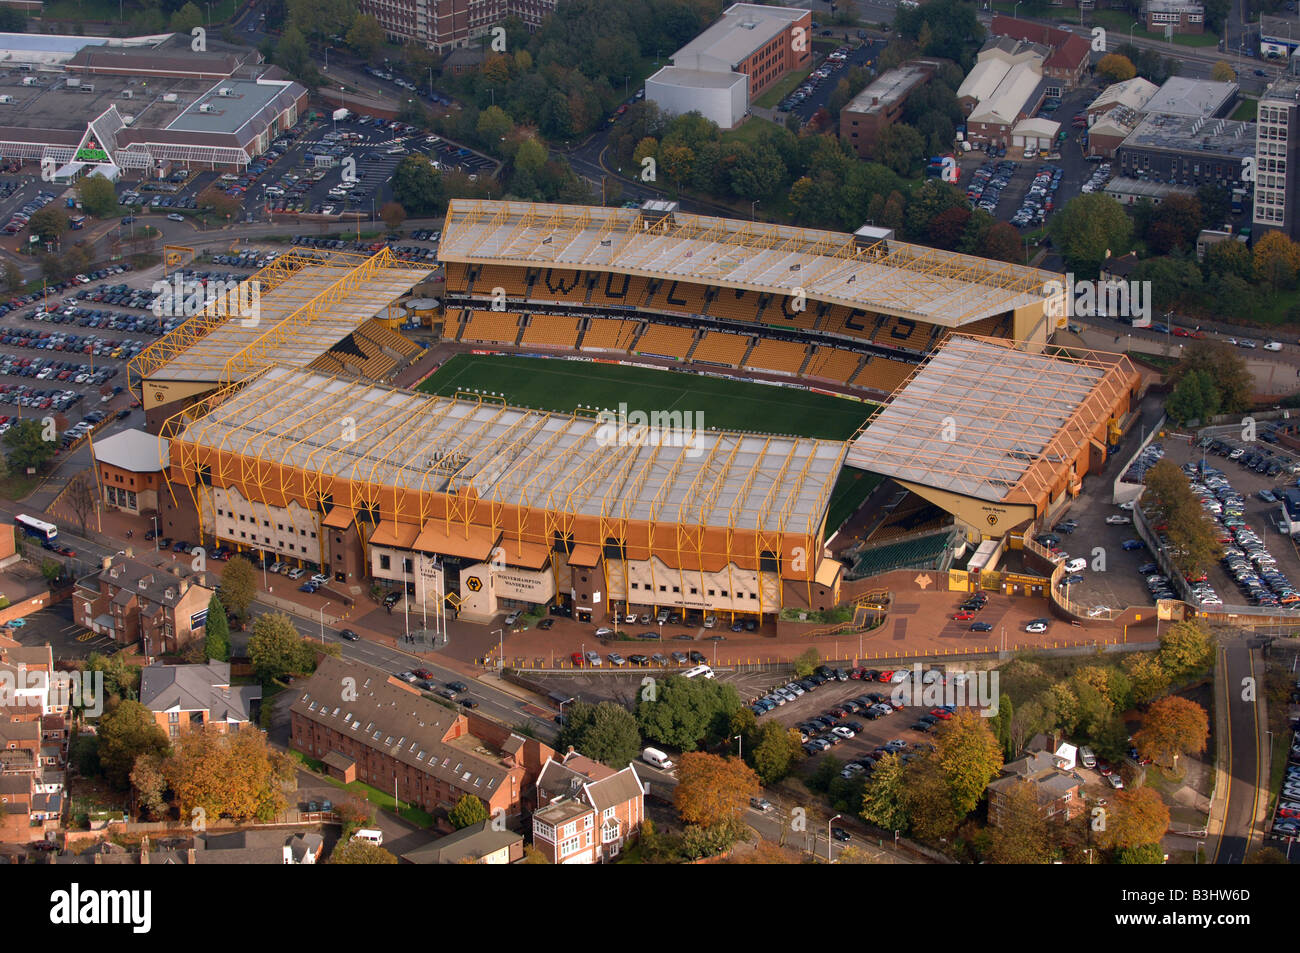 Molineux Pictures 40